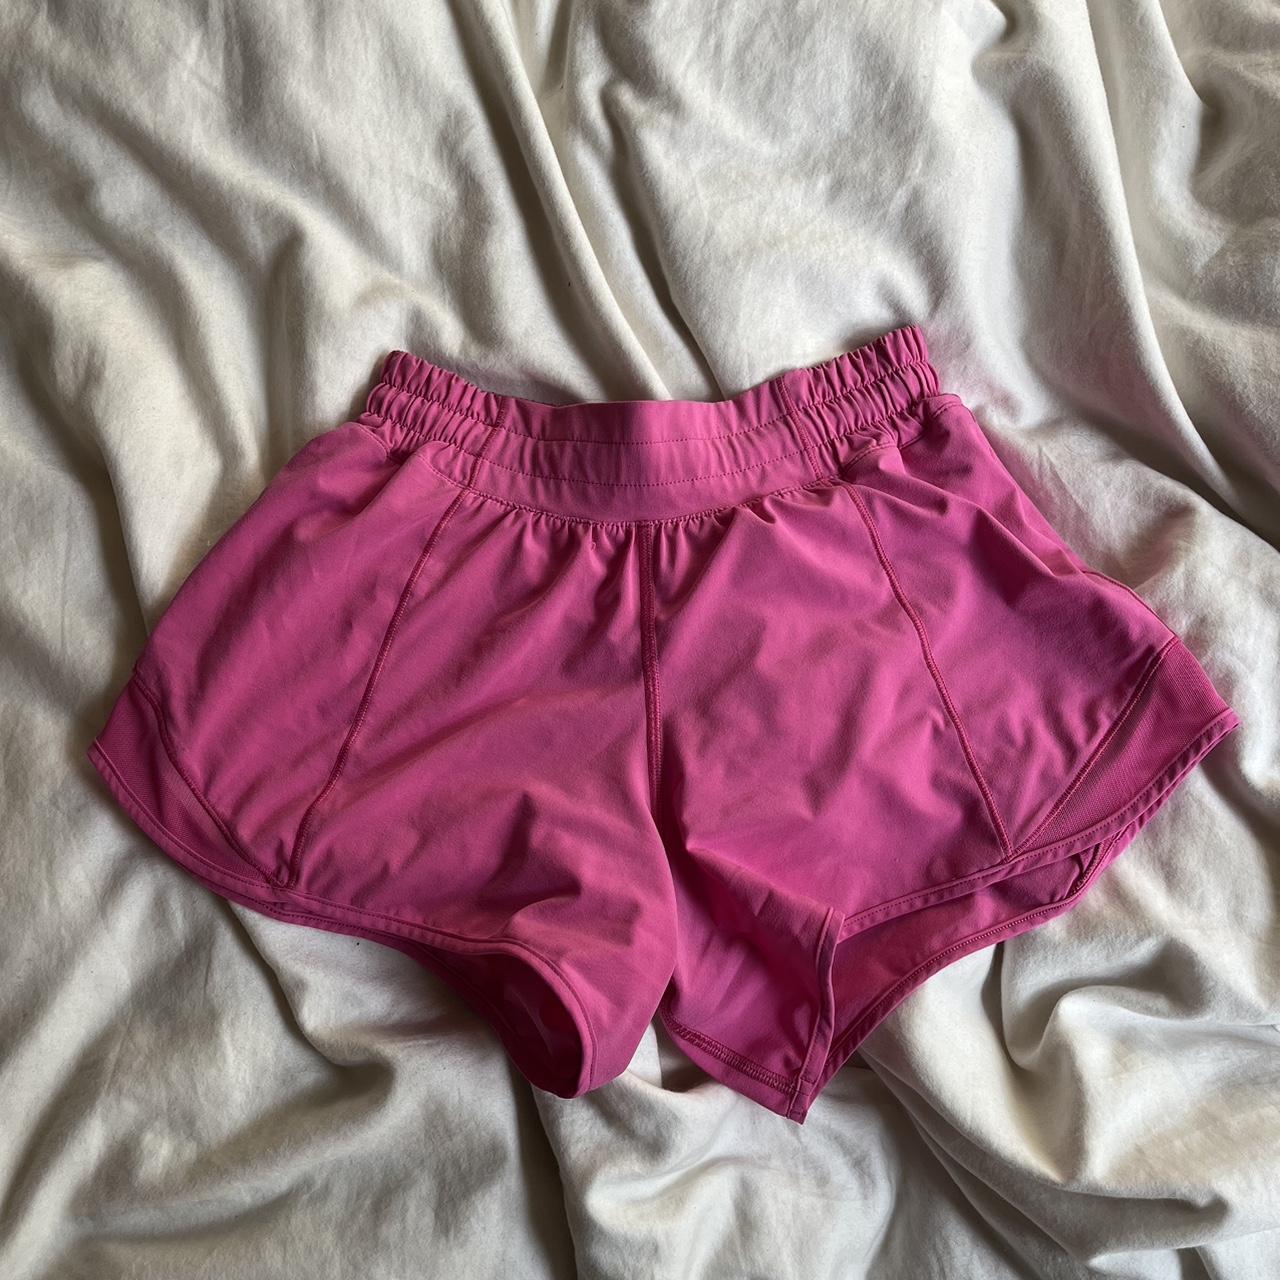 LULULEMON Sonic Pink New Hotty Hot Shorts Size 6 With 4” Inseam NWT